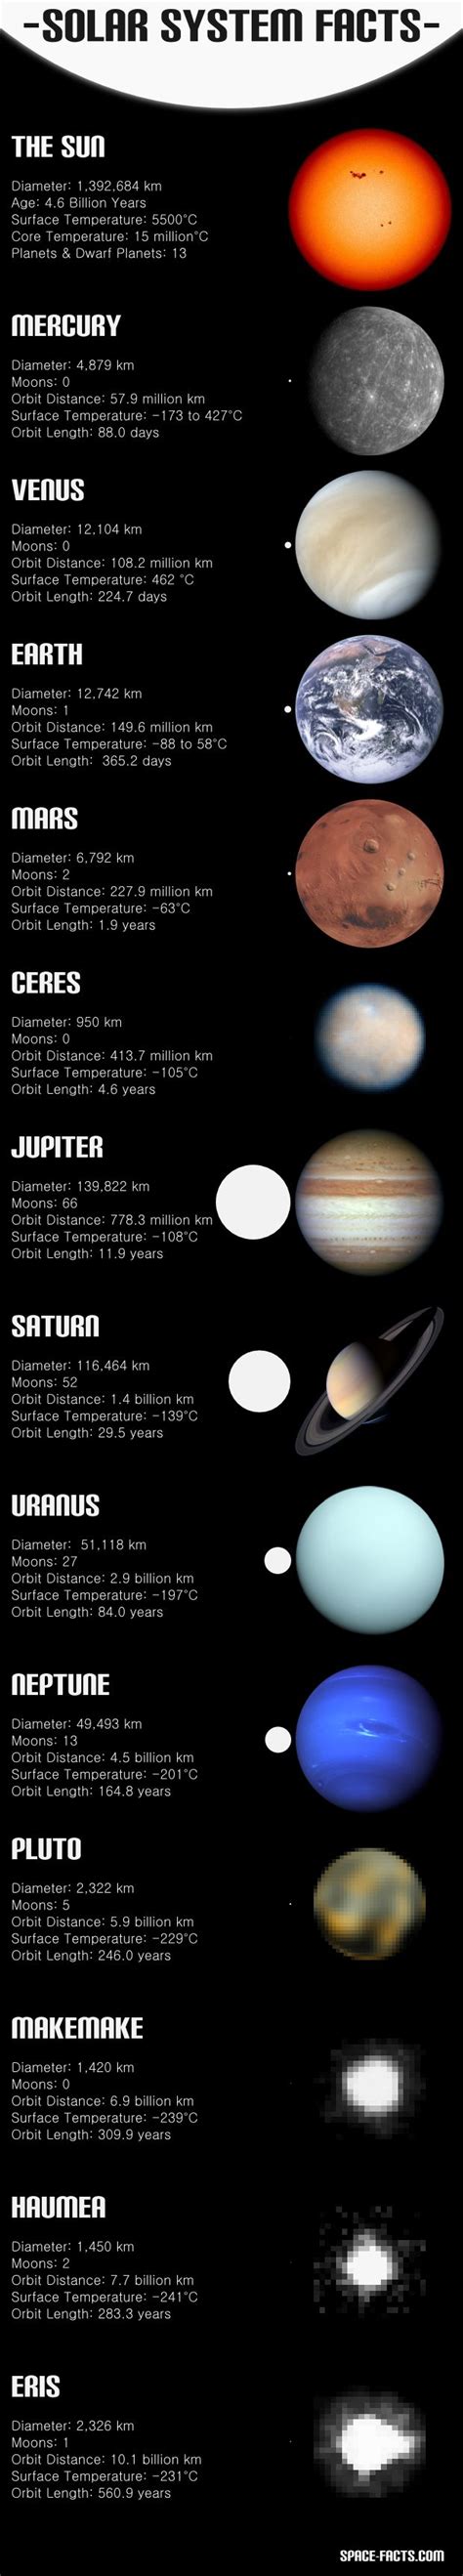 Solar System Facts The Last 4 Are Questionable Pluto Is